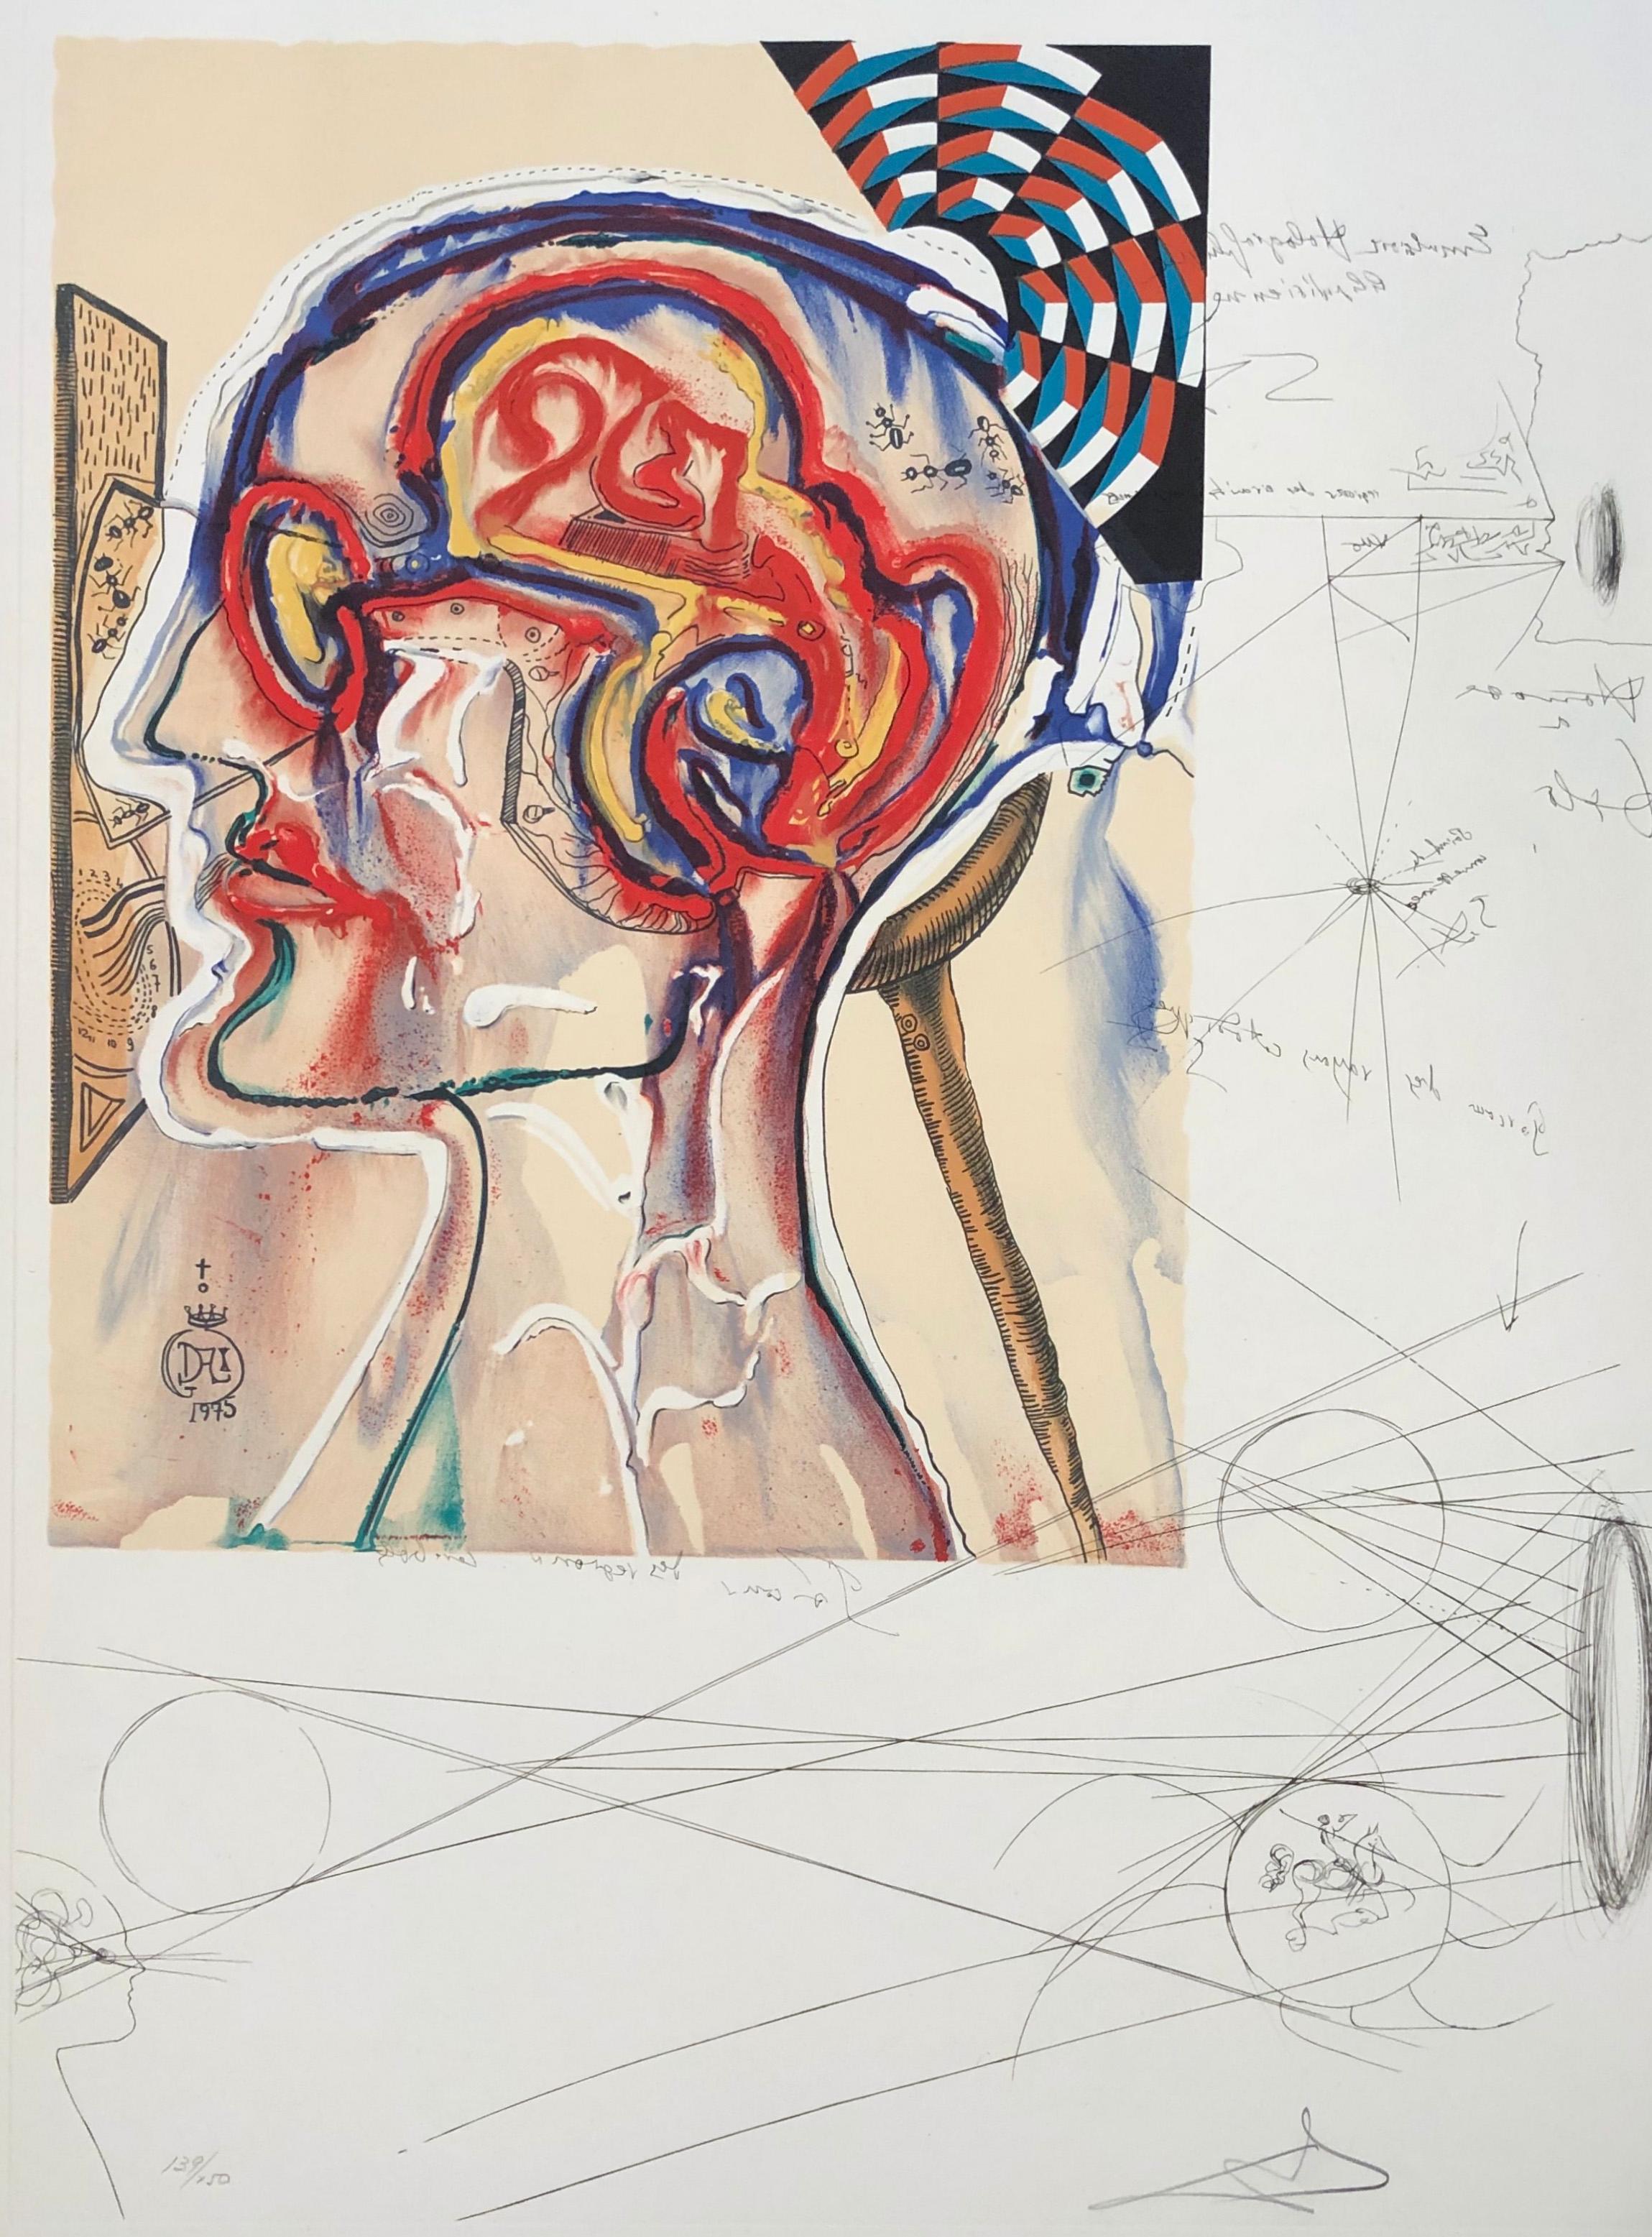 Salvador Dalí Figurative Print - Spectacles with Holograms and Computers For Seeing Imagined